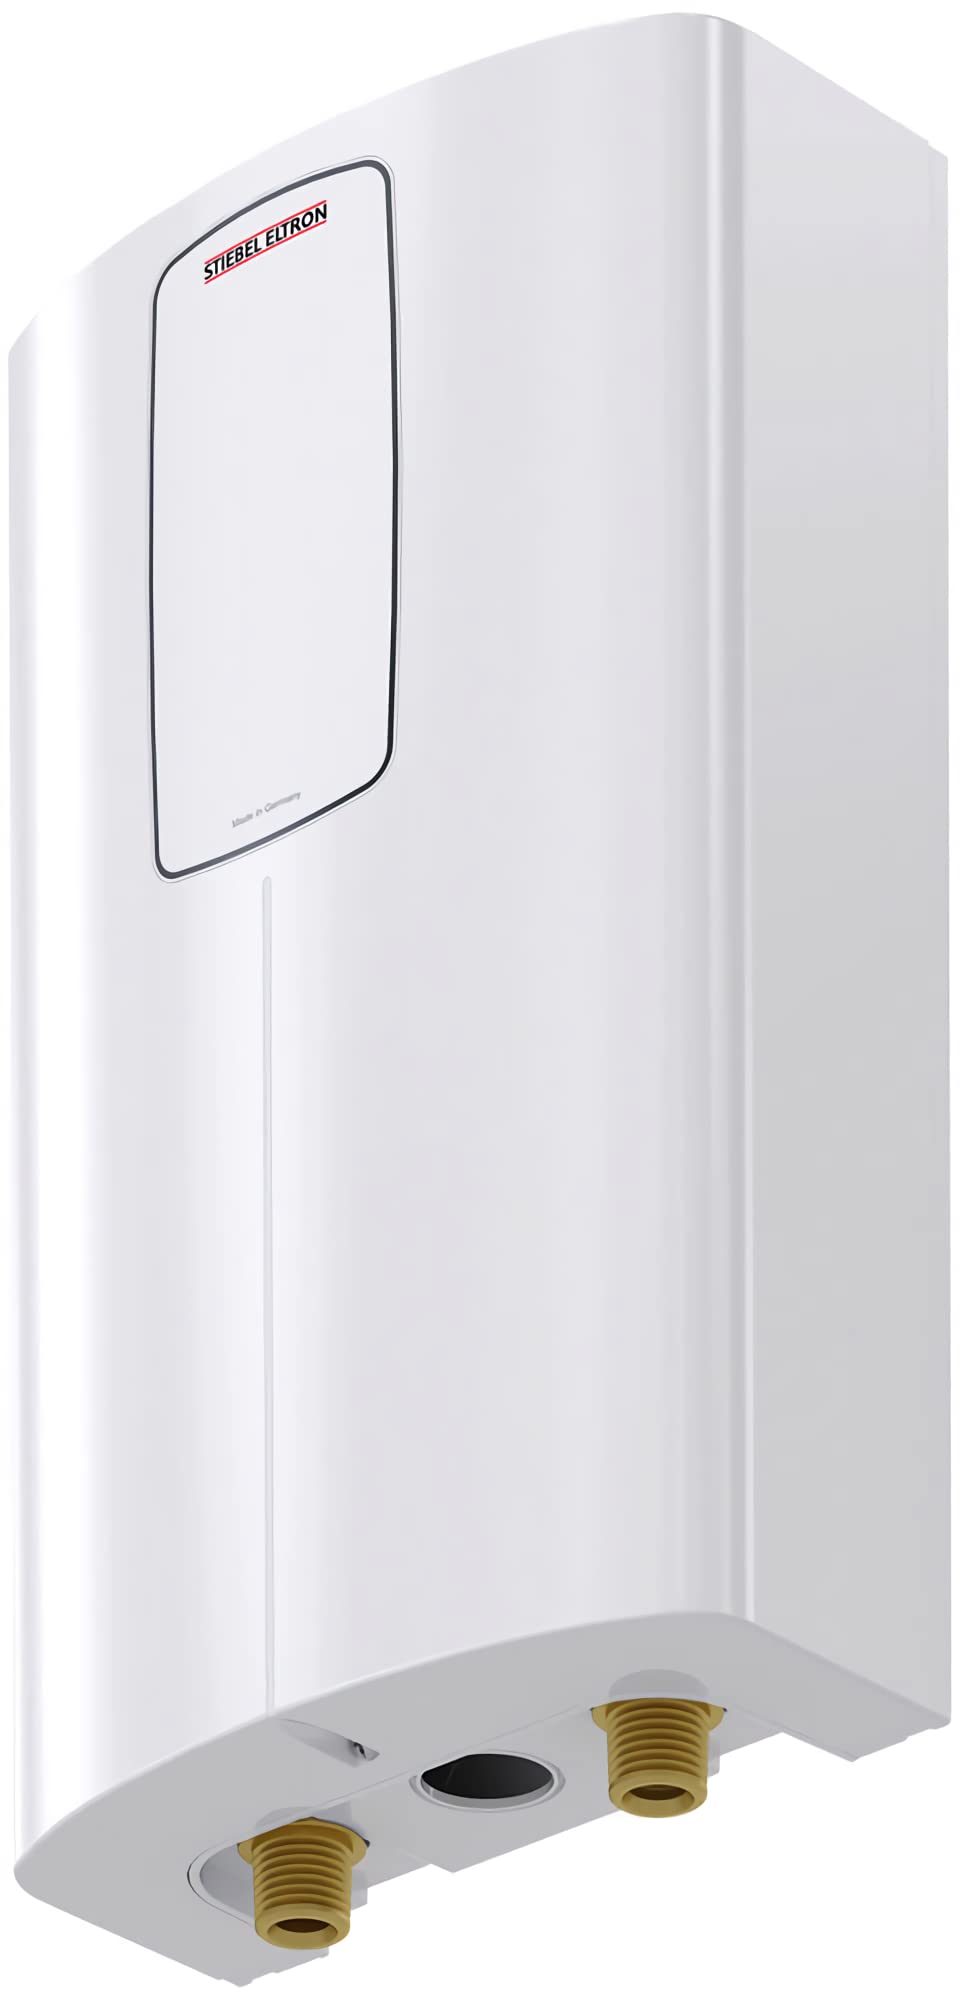 Stiebel Eltron 202648 Model DHC 4-2 Classic Single Sink Point-of-Use Electric Tankless Water Heater, 240V, 1 Phase, 50/60 Hz, Hydraulically Controlled, Safety High Limit Switch